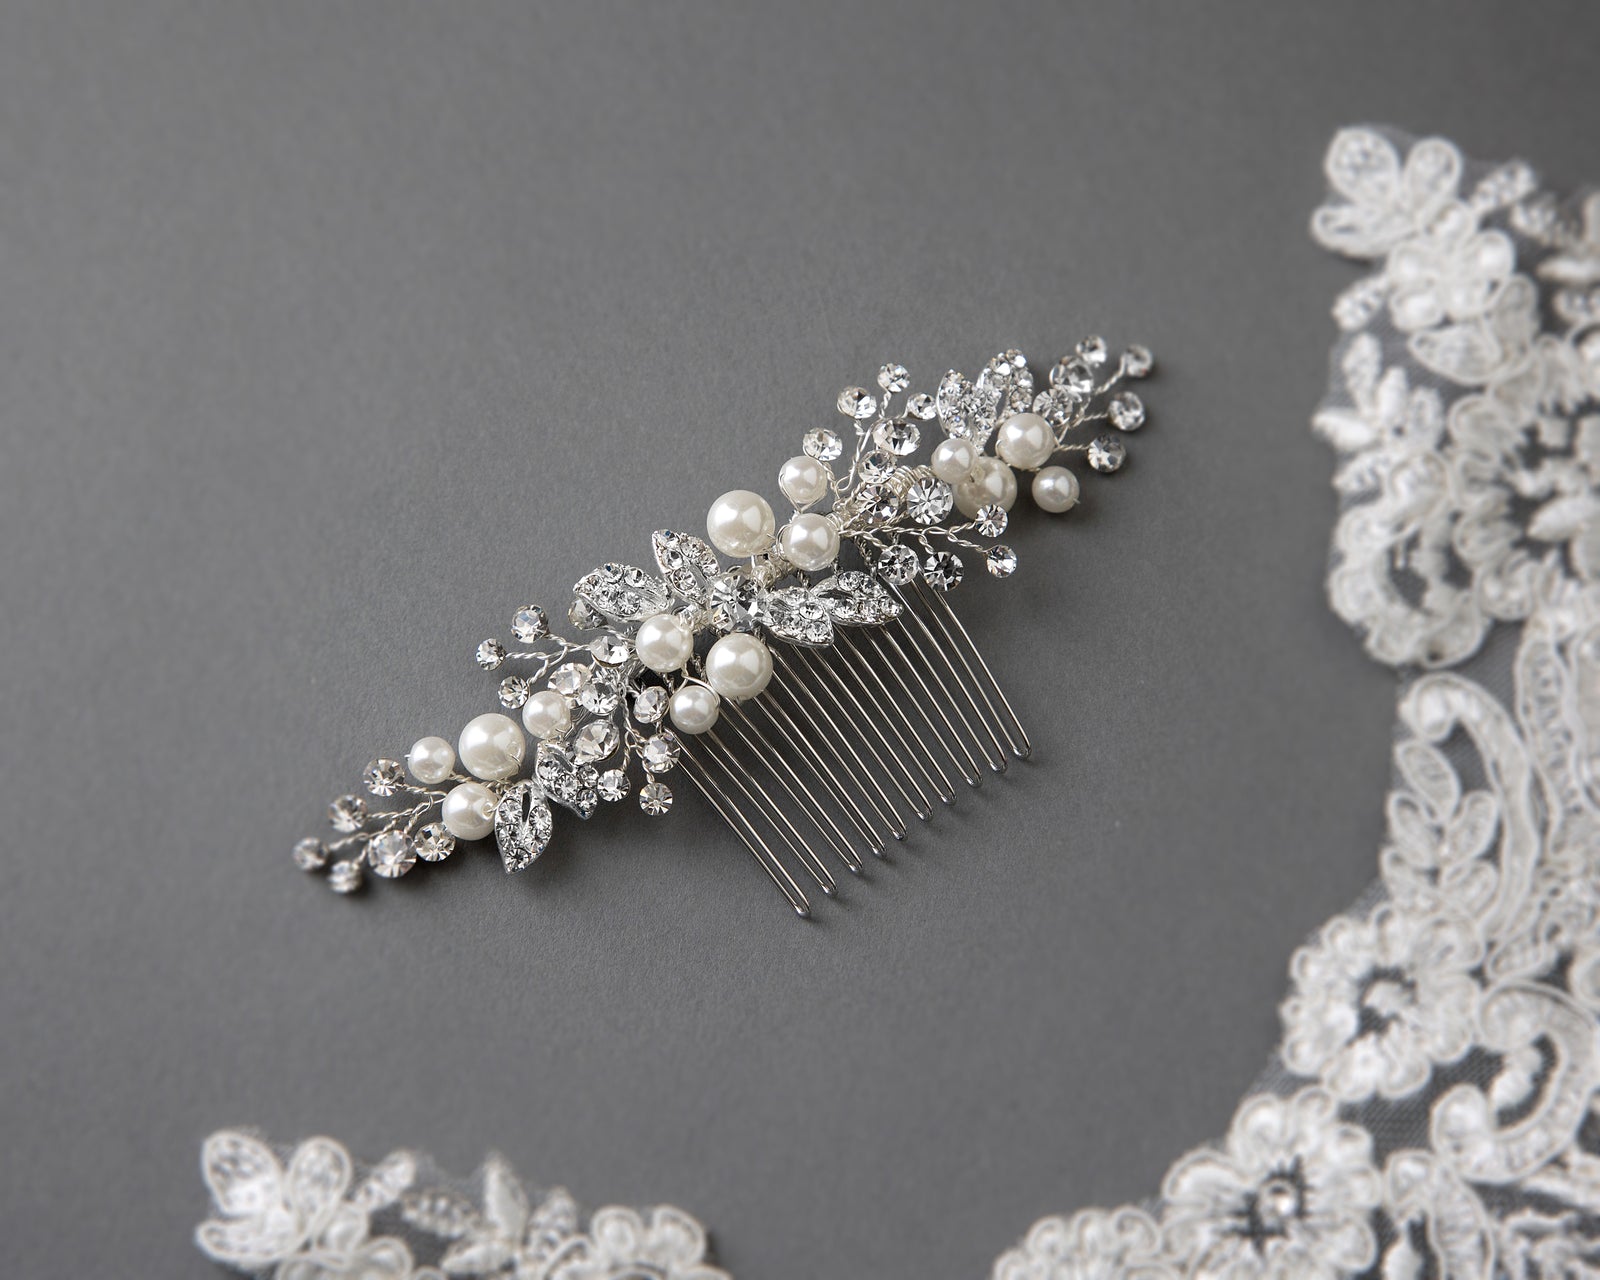 Ivory Pearl and Crystal Leaves Narrow Hair Comb - Cassandra Lynne